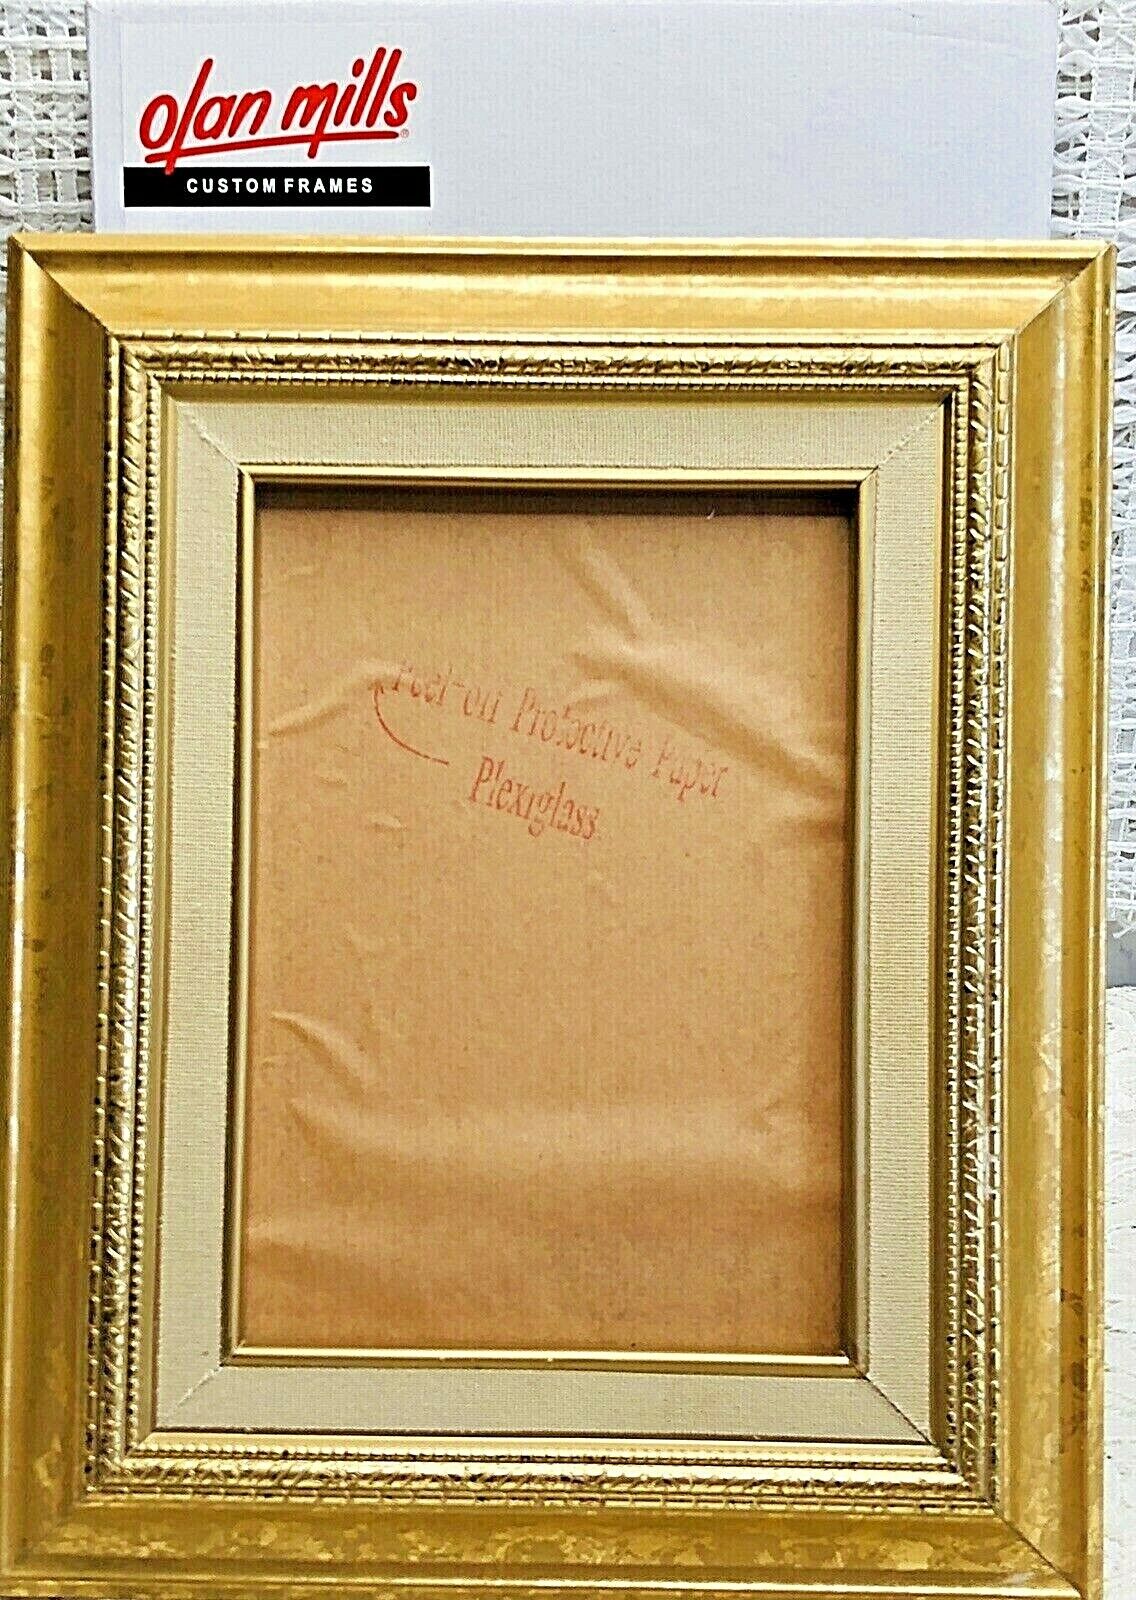 Olan Mills 5x7 Gold Wooden Back Loading Ornate Inlay Scooped Edge Picture Frame 